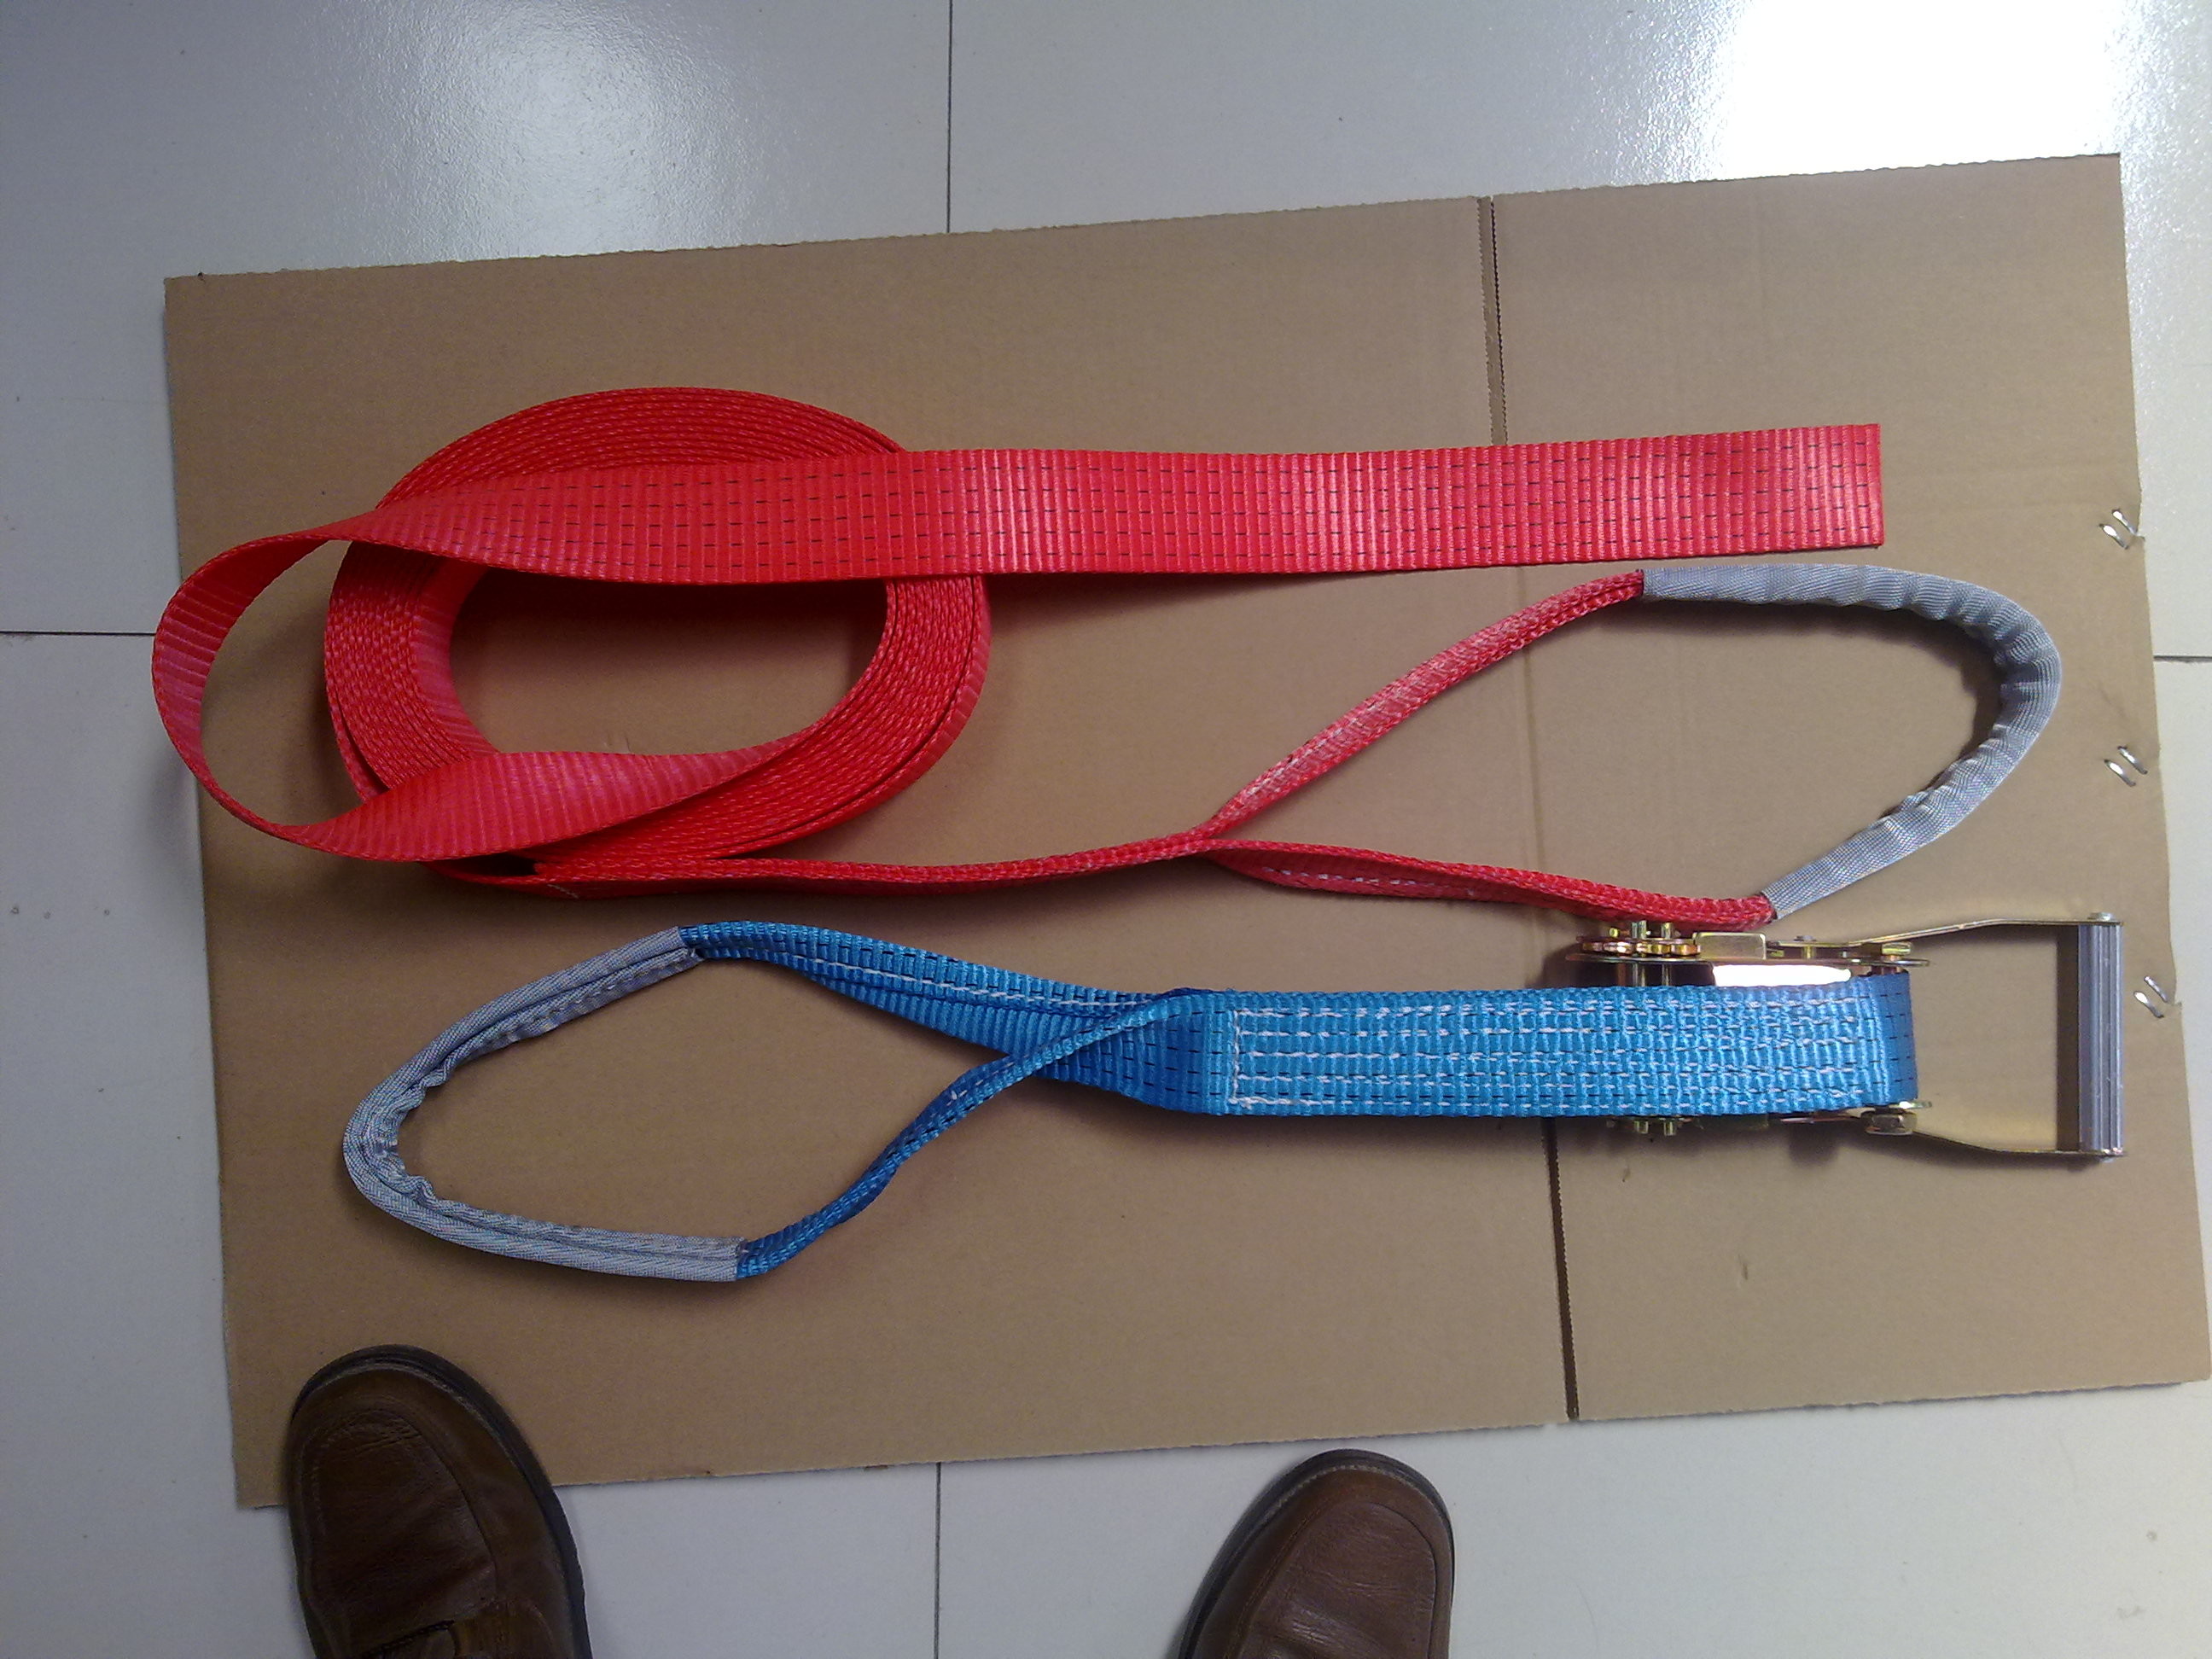  50MM Ratchet Tie Down Straps LC2500 DIN EN 12195-2 Corrosion Resistance With Eyes Manufactures